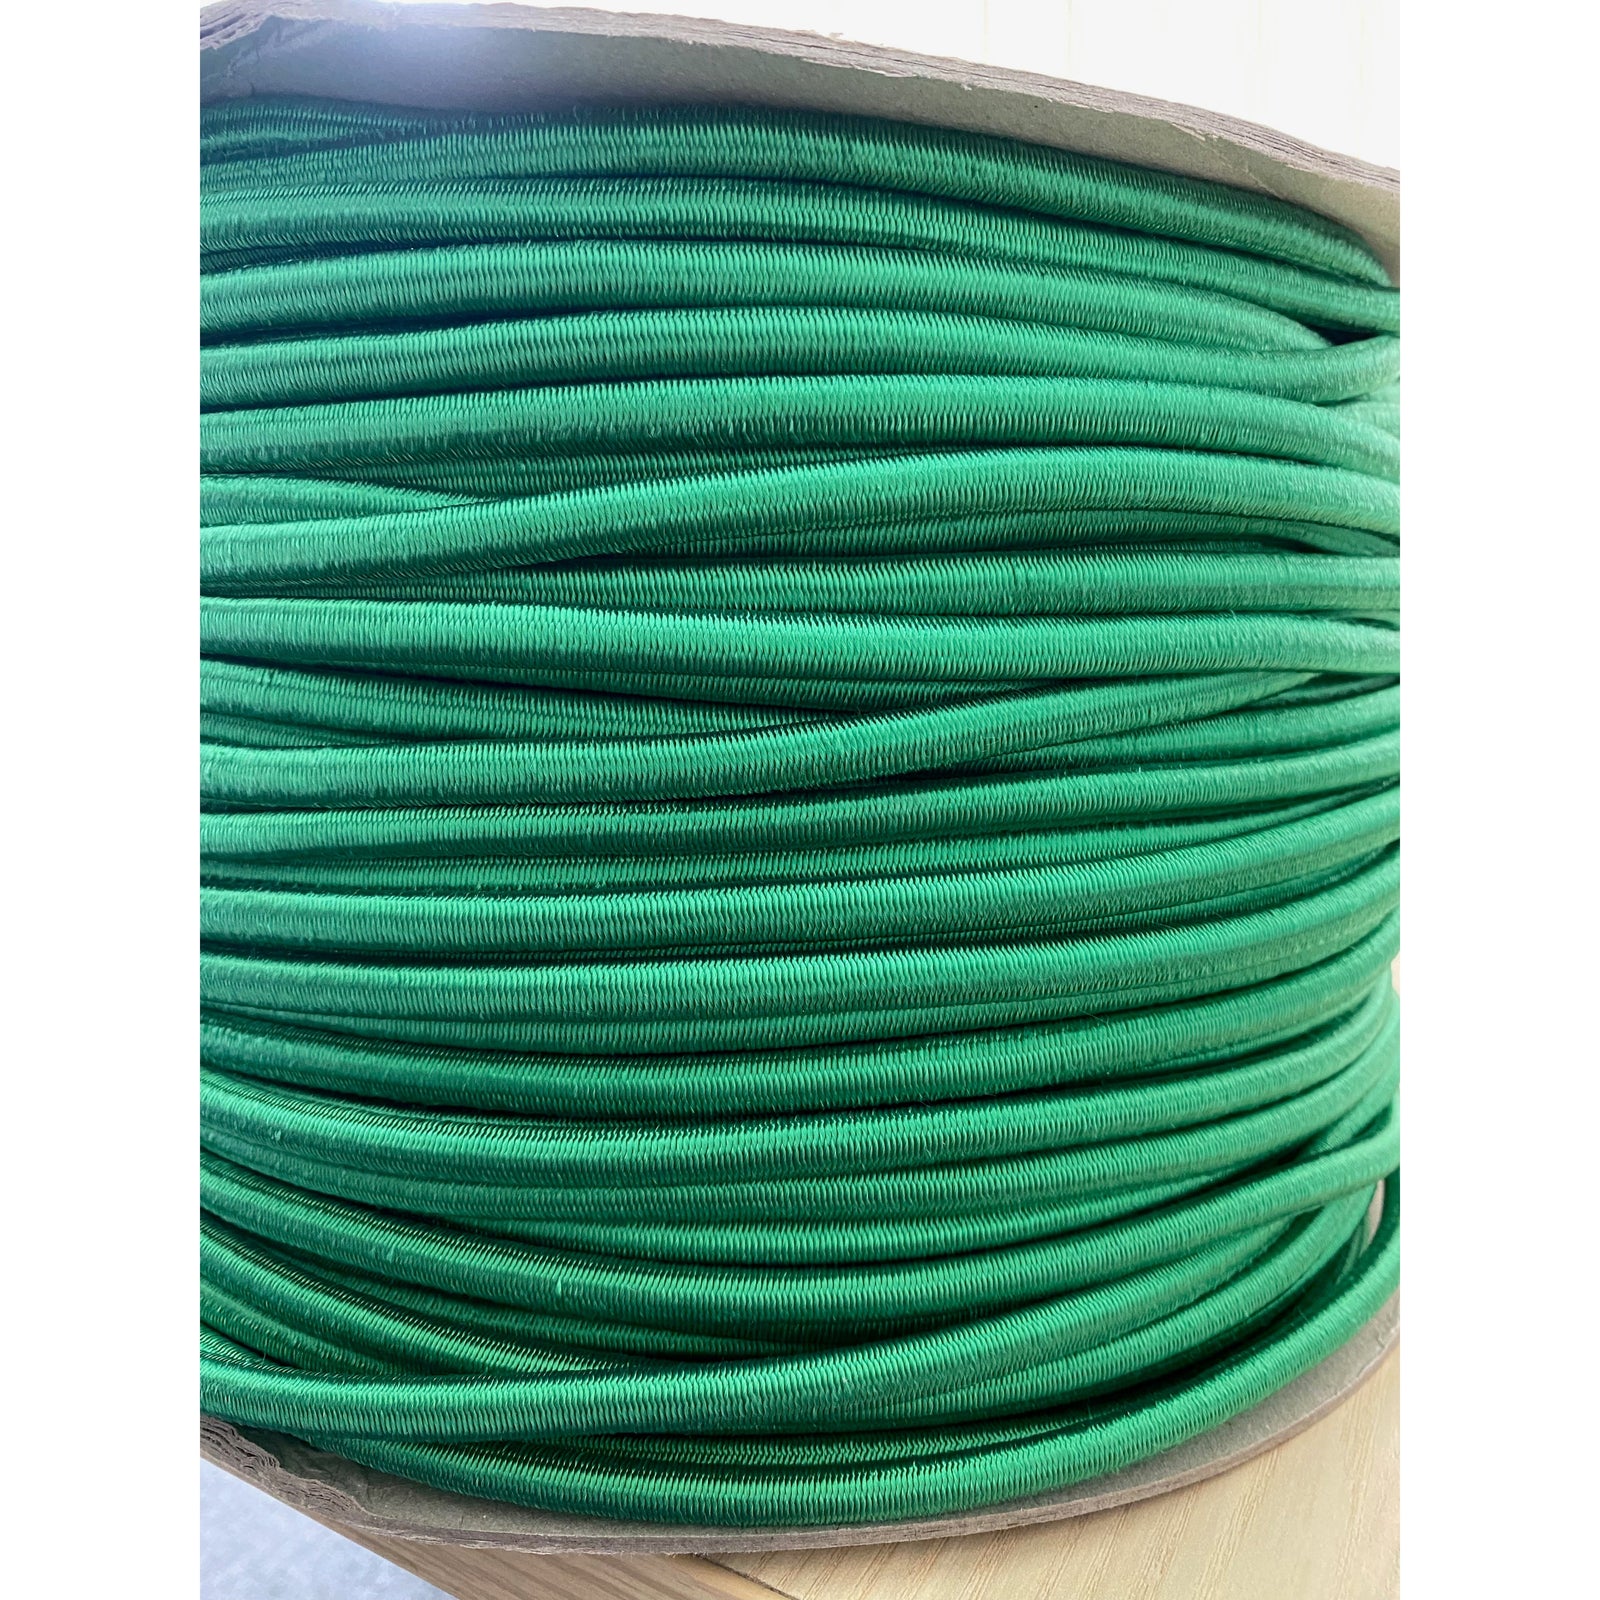 Elastic cord - Rope - Ropes - Products